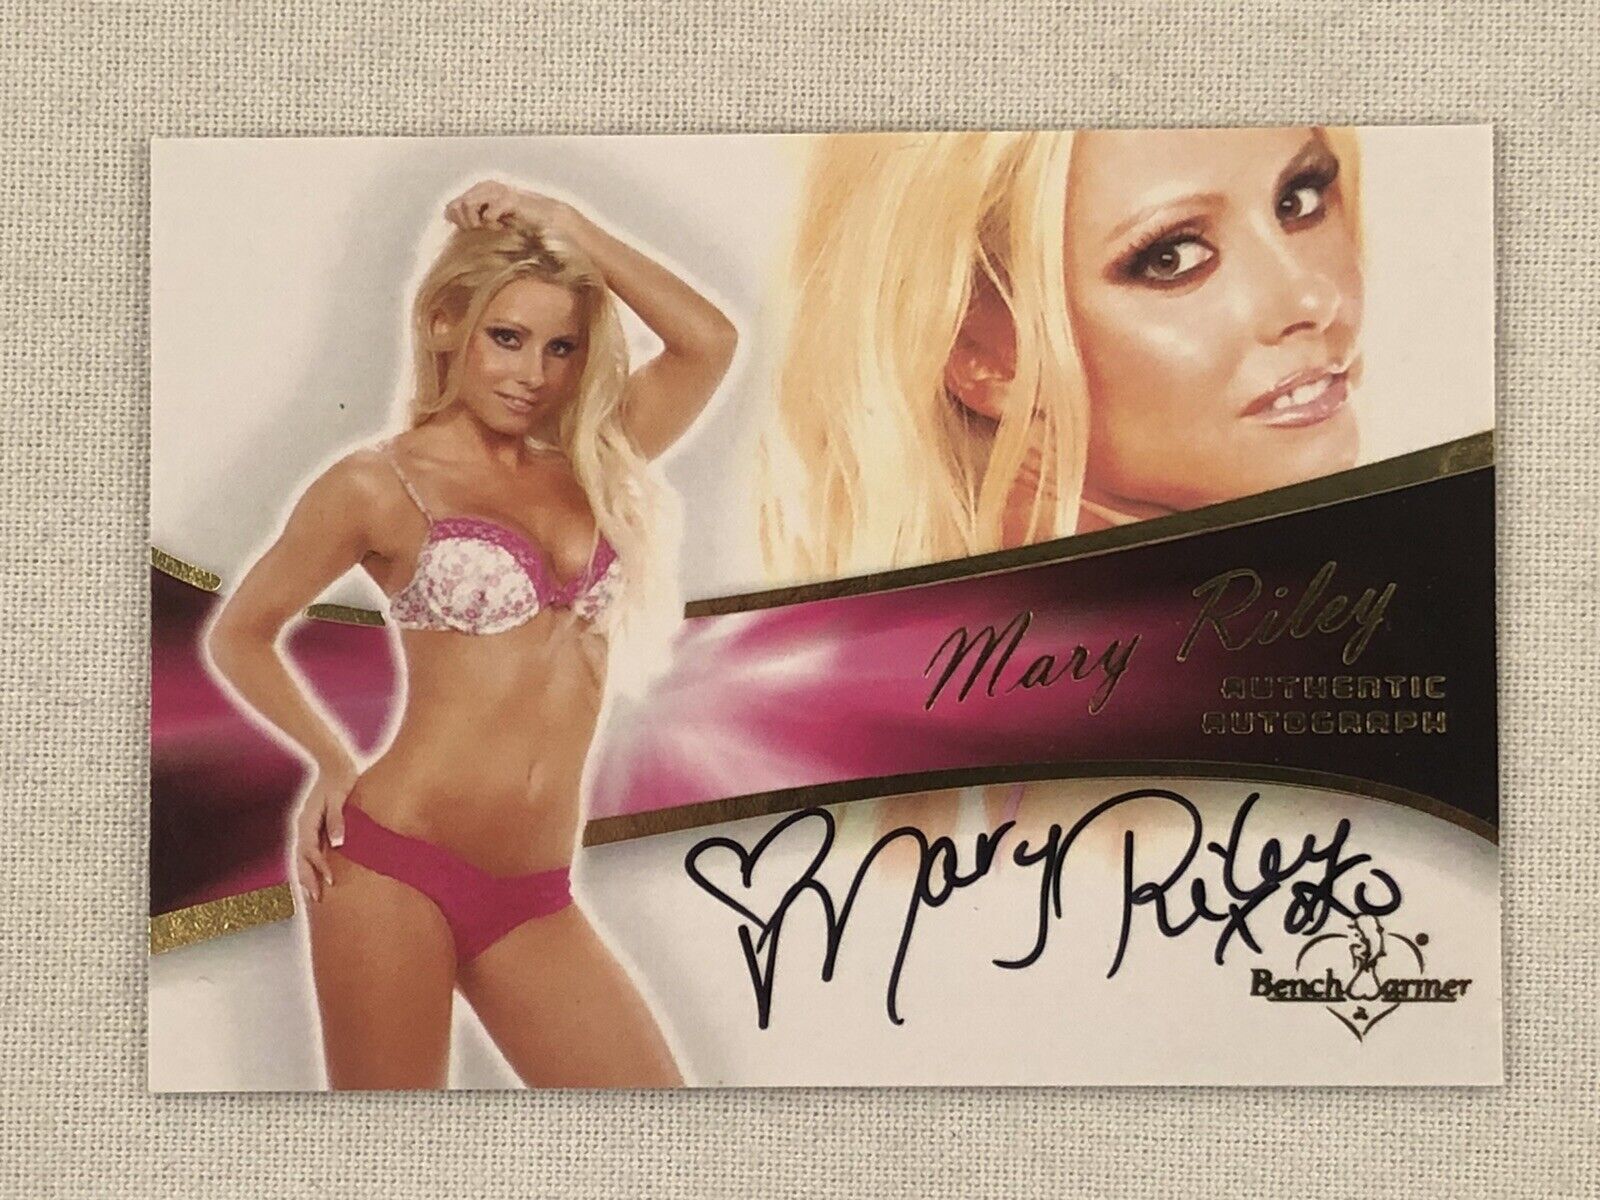 2011 Benchwarmer Bubble Gum Mary Riley Autograph Card A-01 Bench Warmer